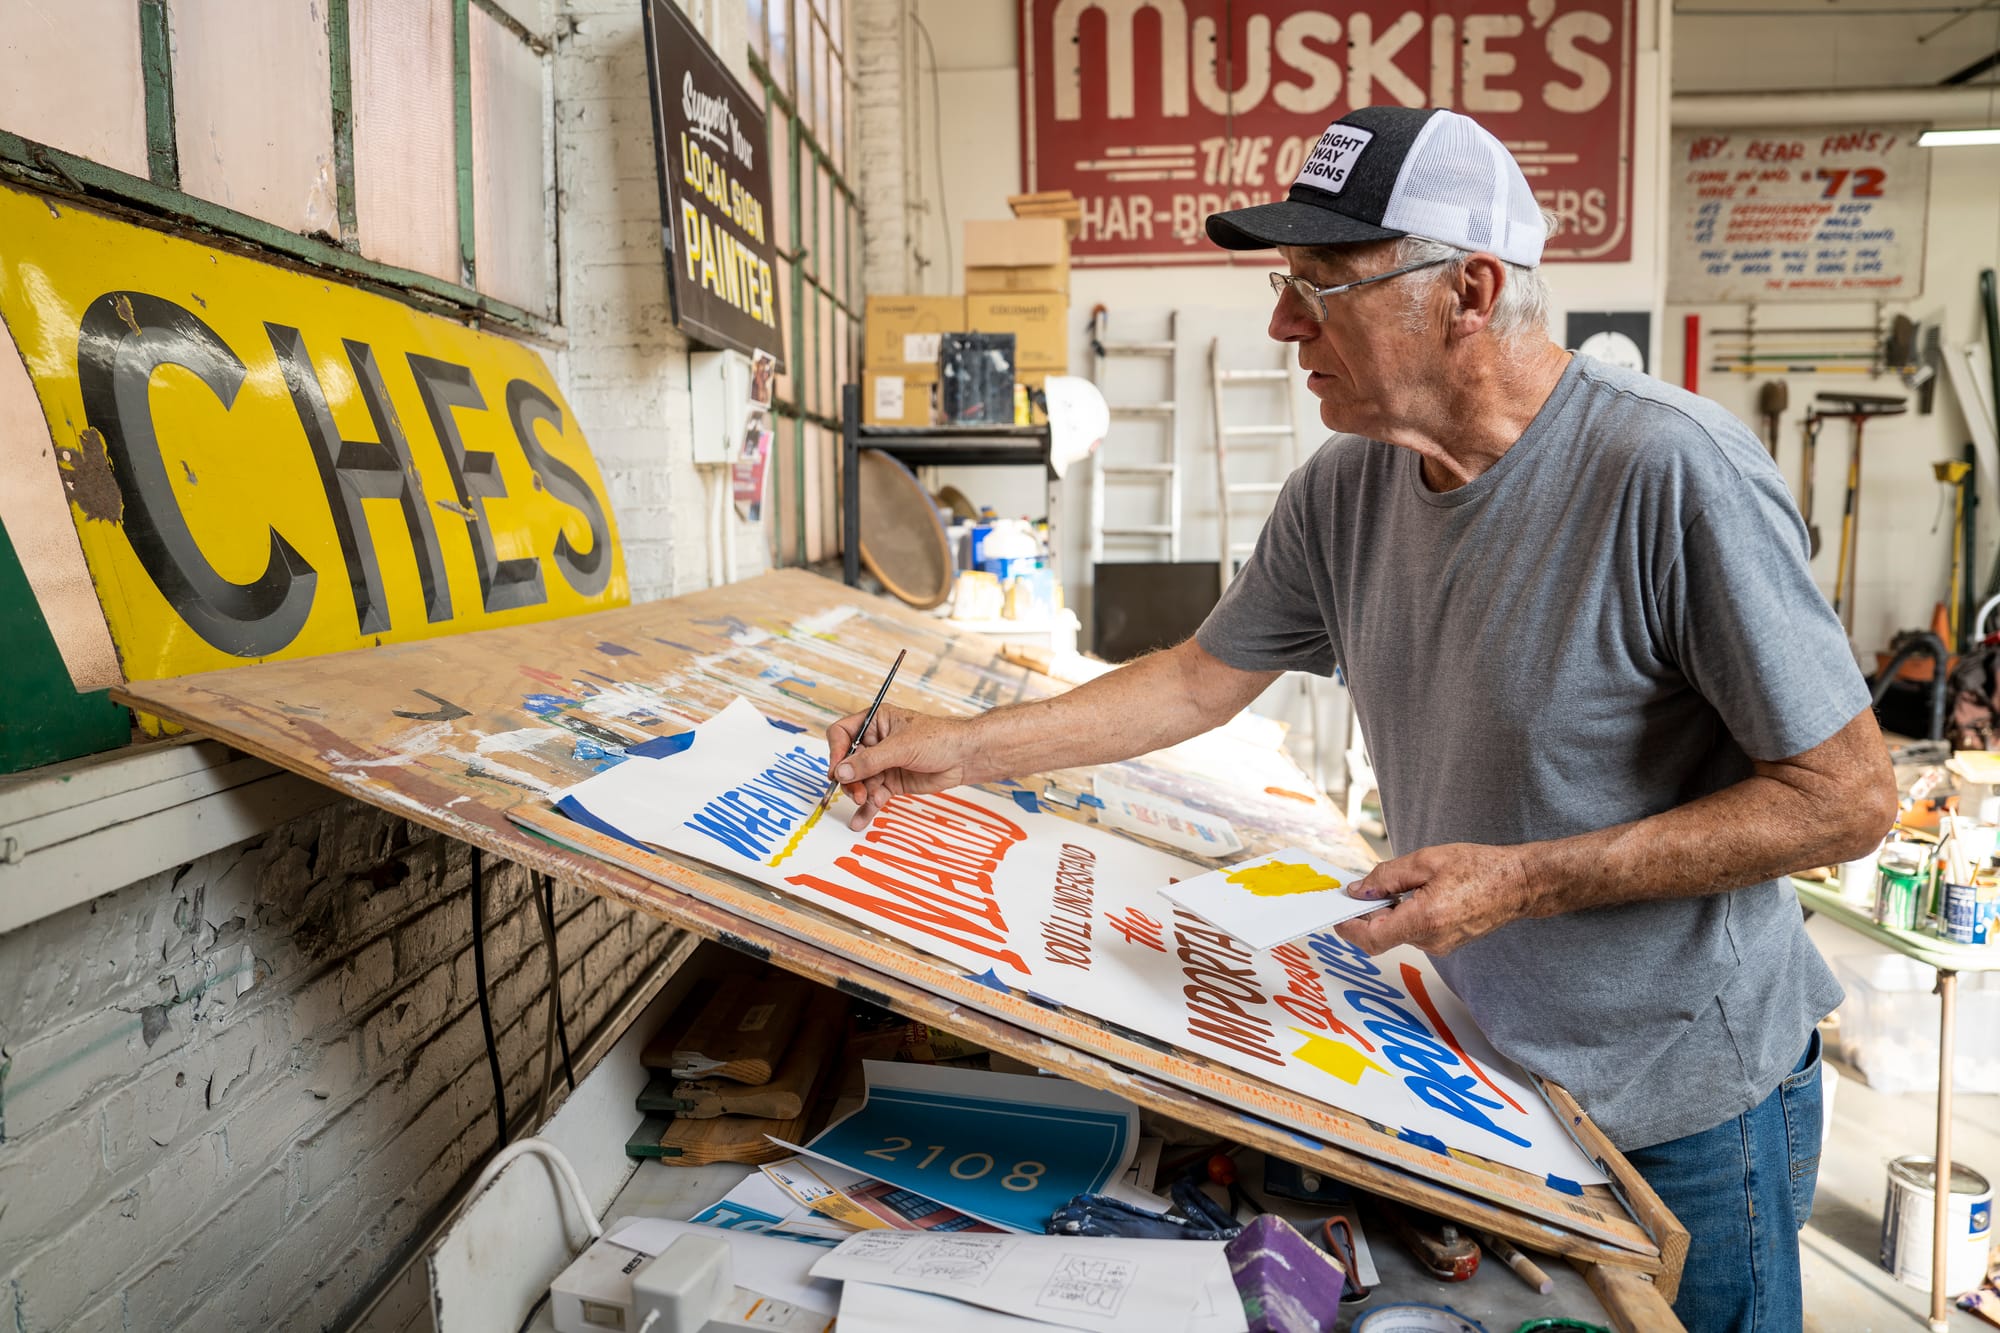 Man in a baseball cap working at an inclined easel painting a paper sign. The location is a sign shop with numerous pieces of signage around.